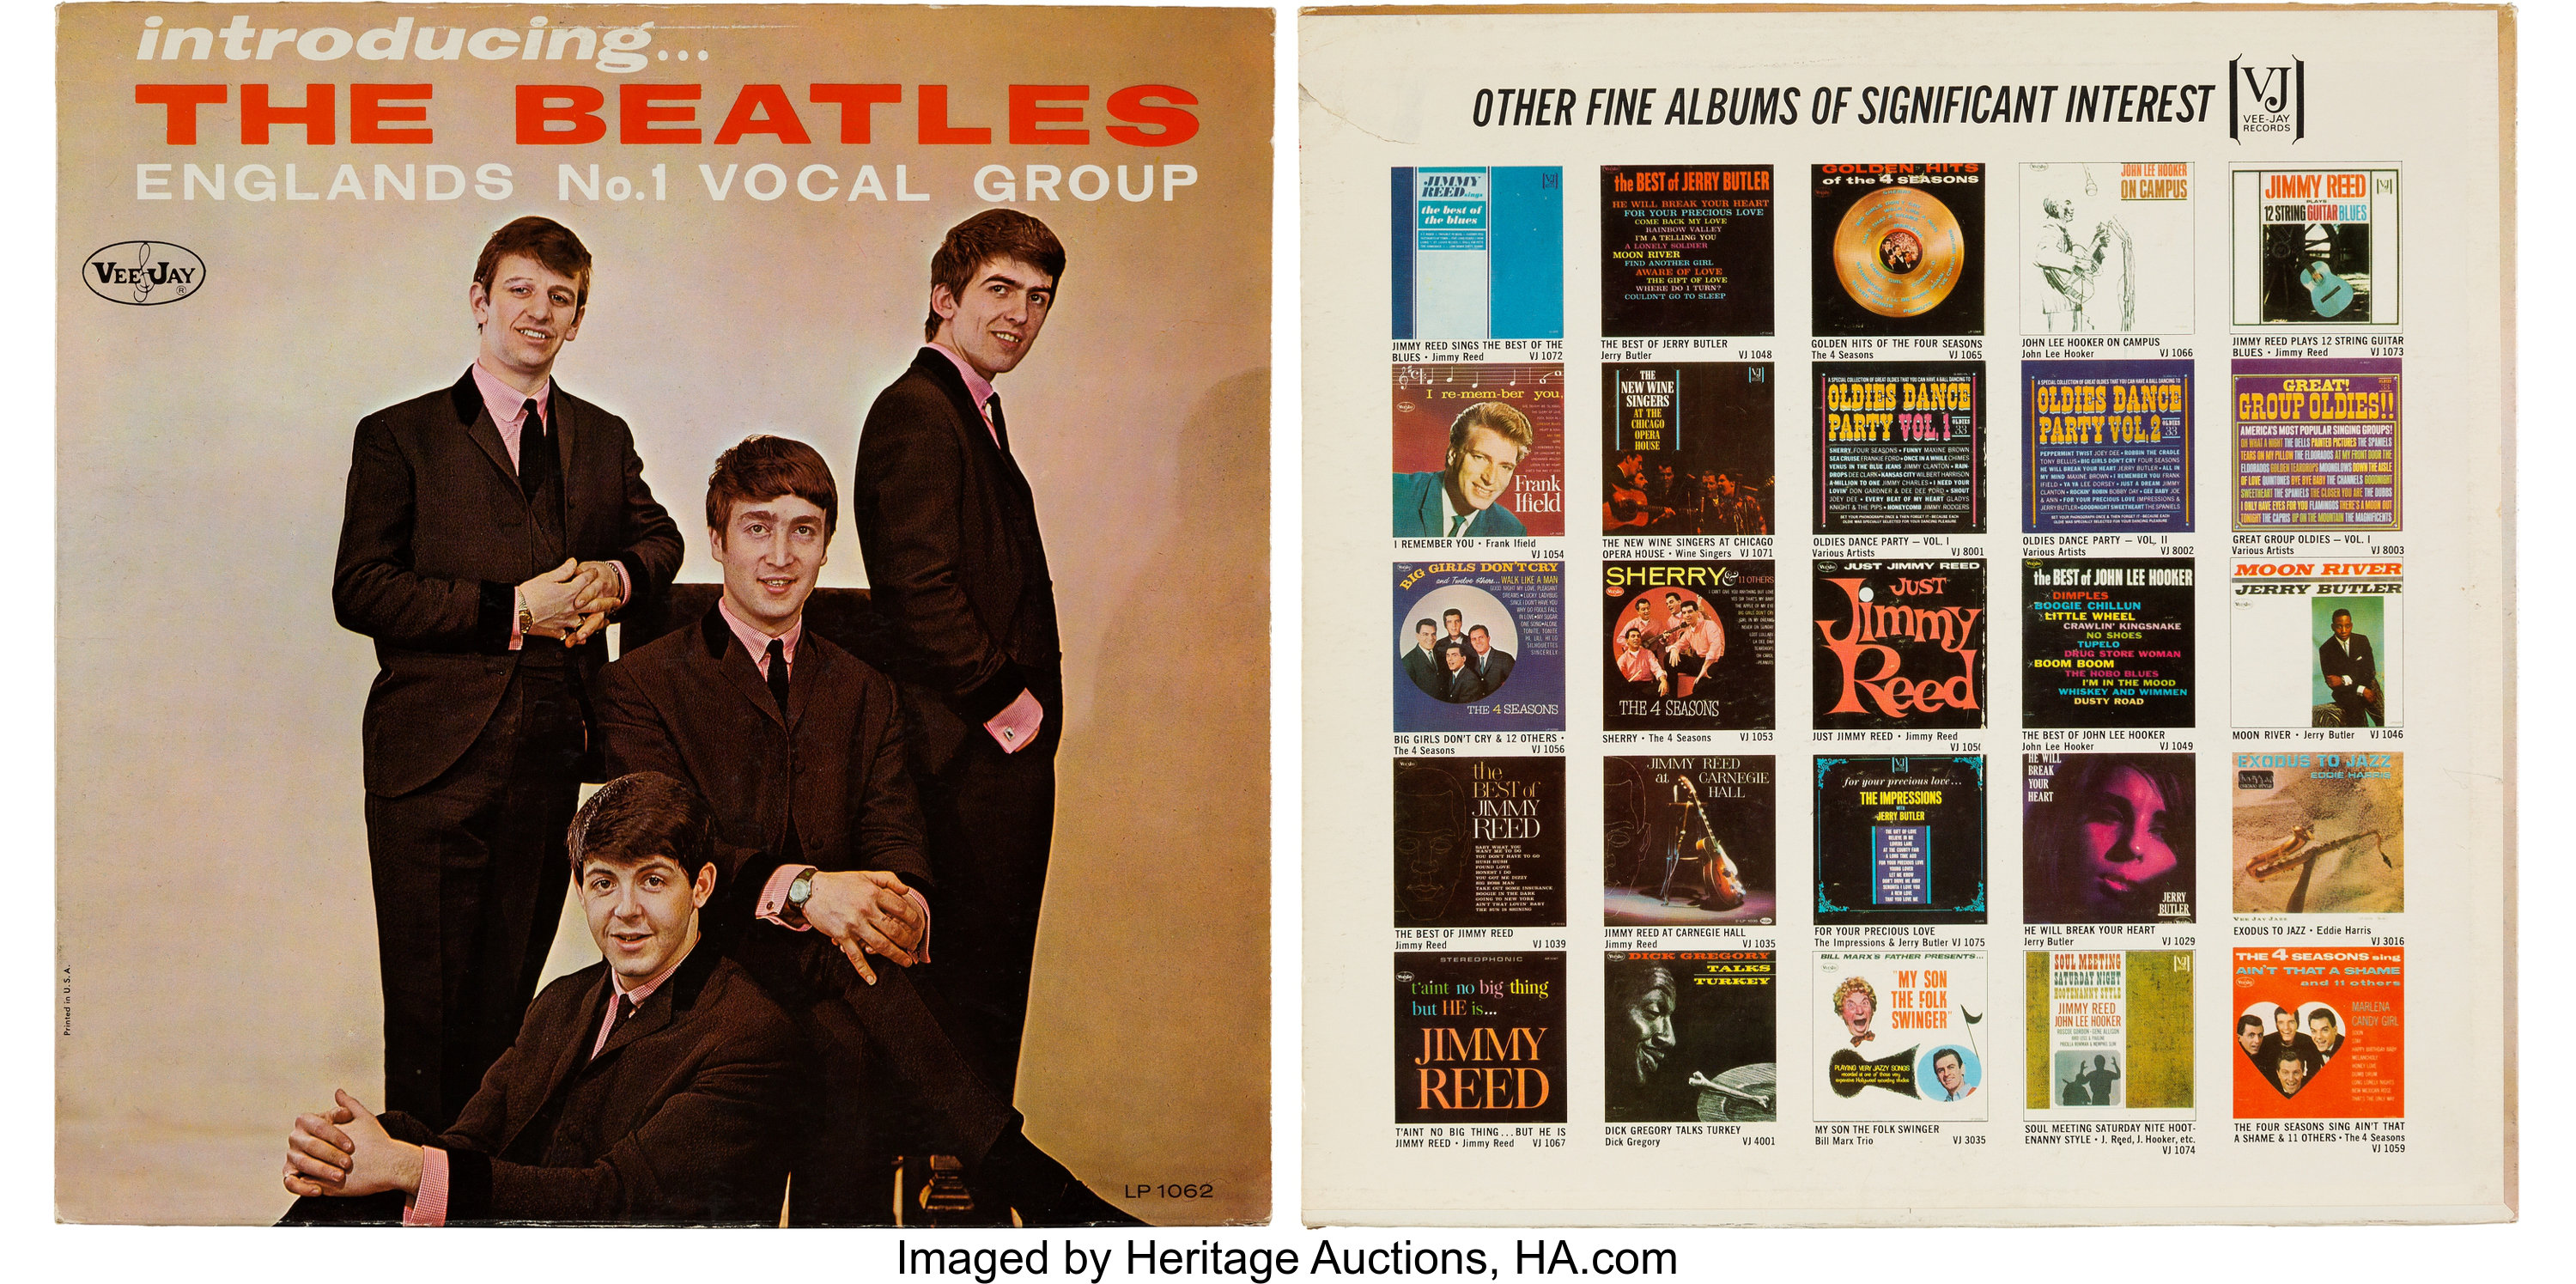 Introducing The Beatles Mono Ad-Back LP (Vee-Jay 1062, 1963